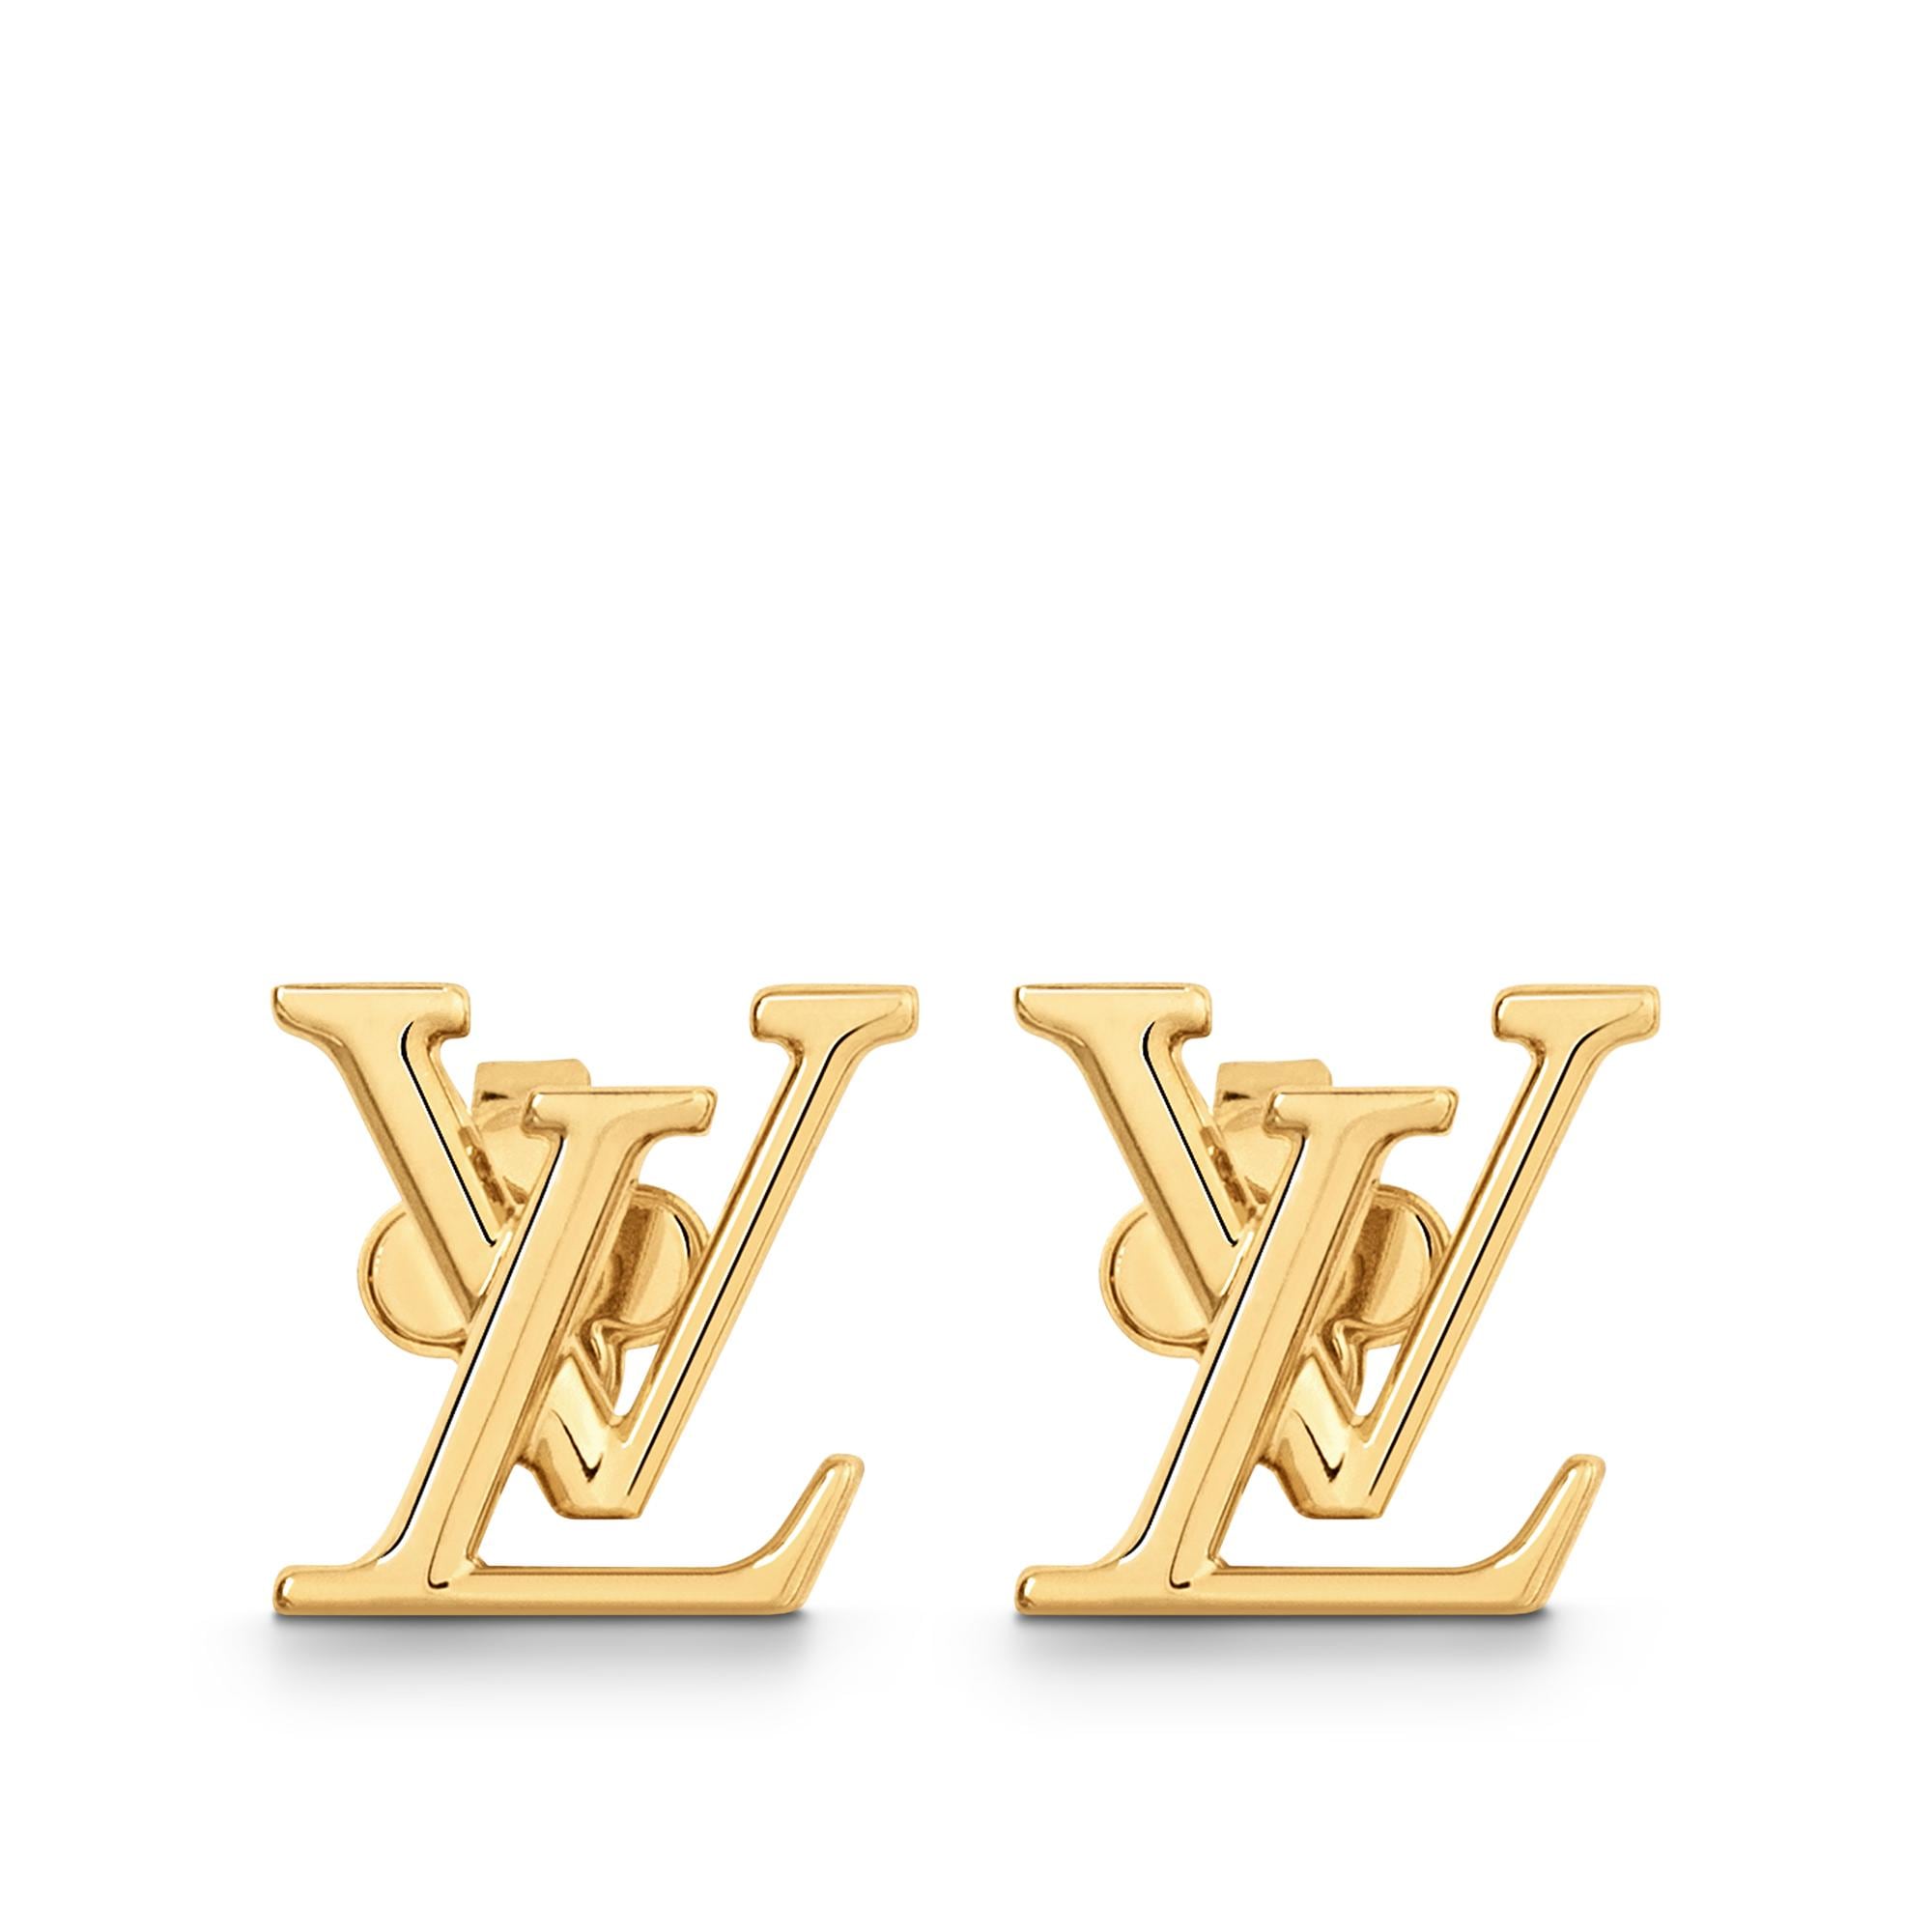 Louis Vuitton LV Iconic Earrings in Gold - WOMEN - Accessories